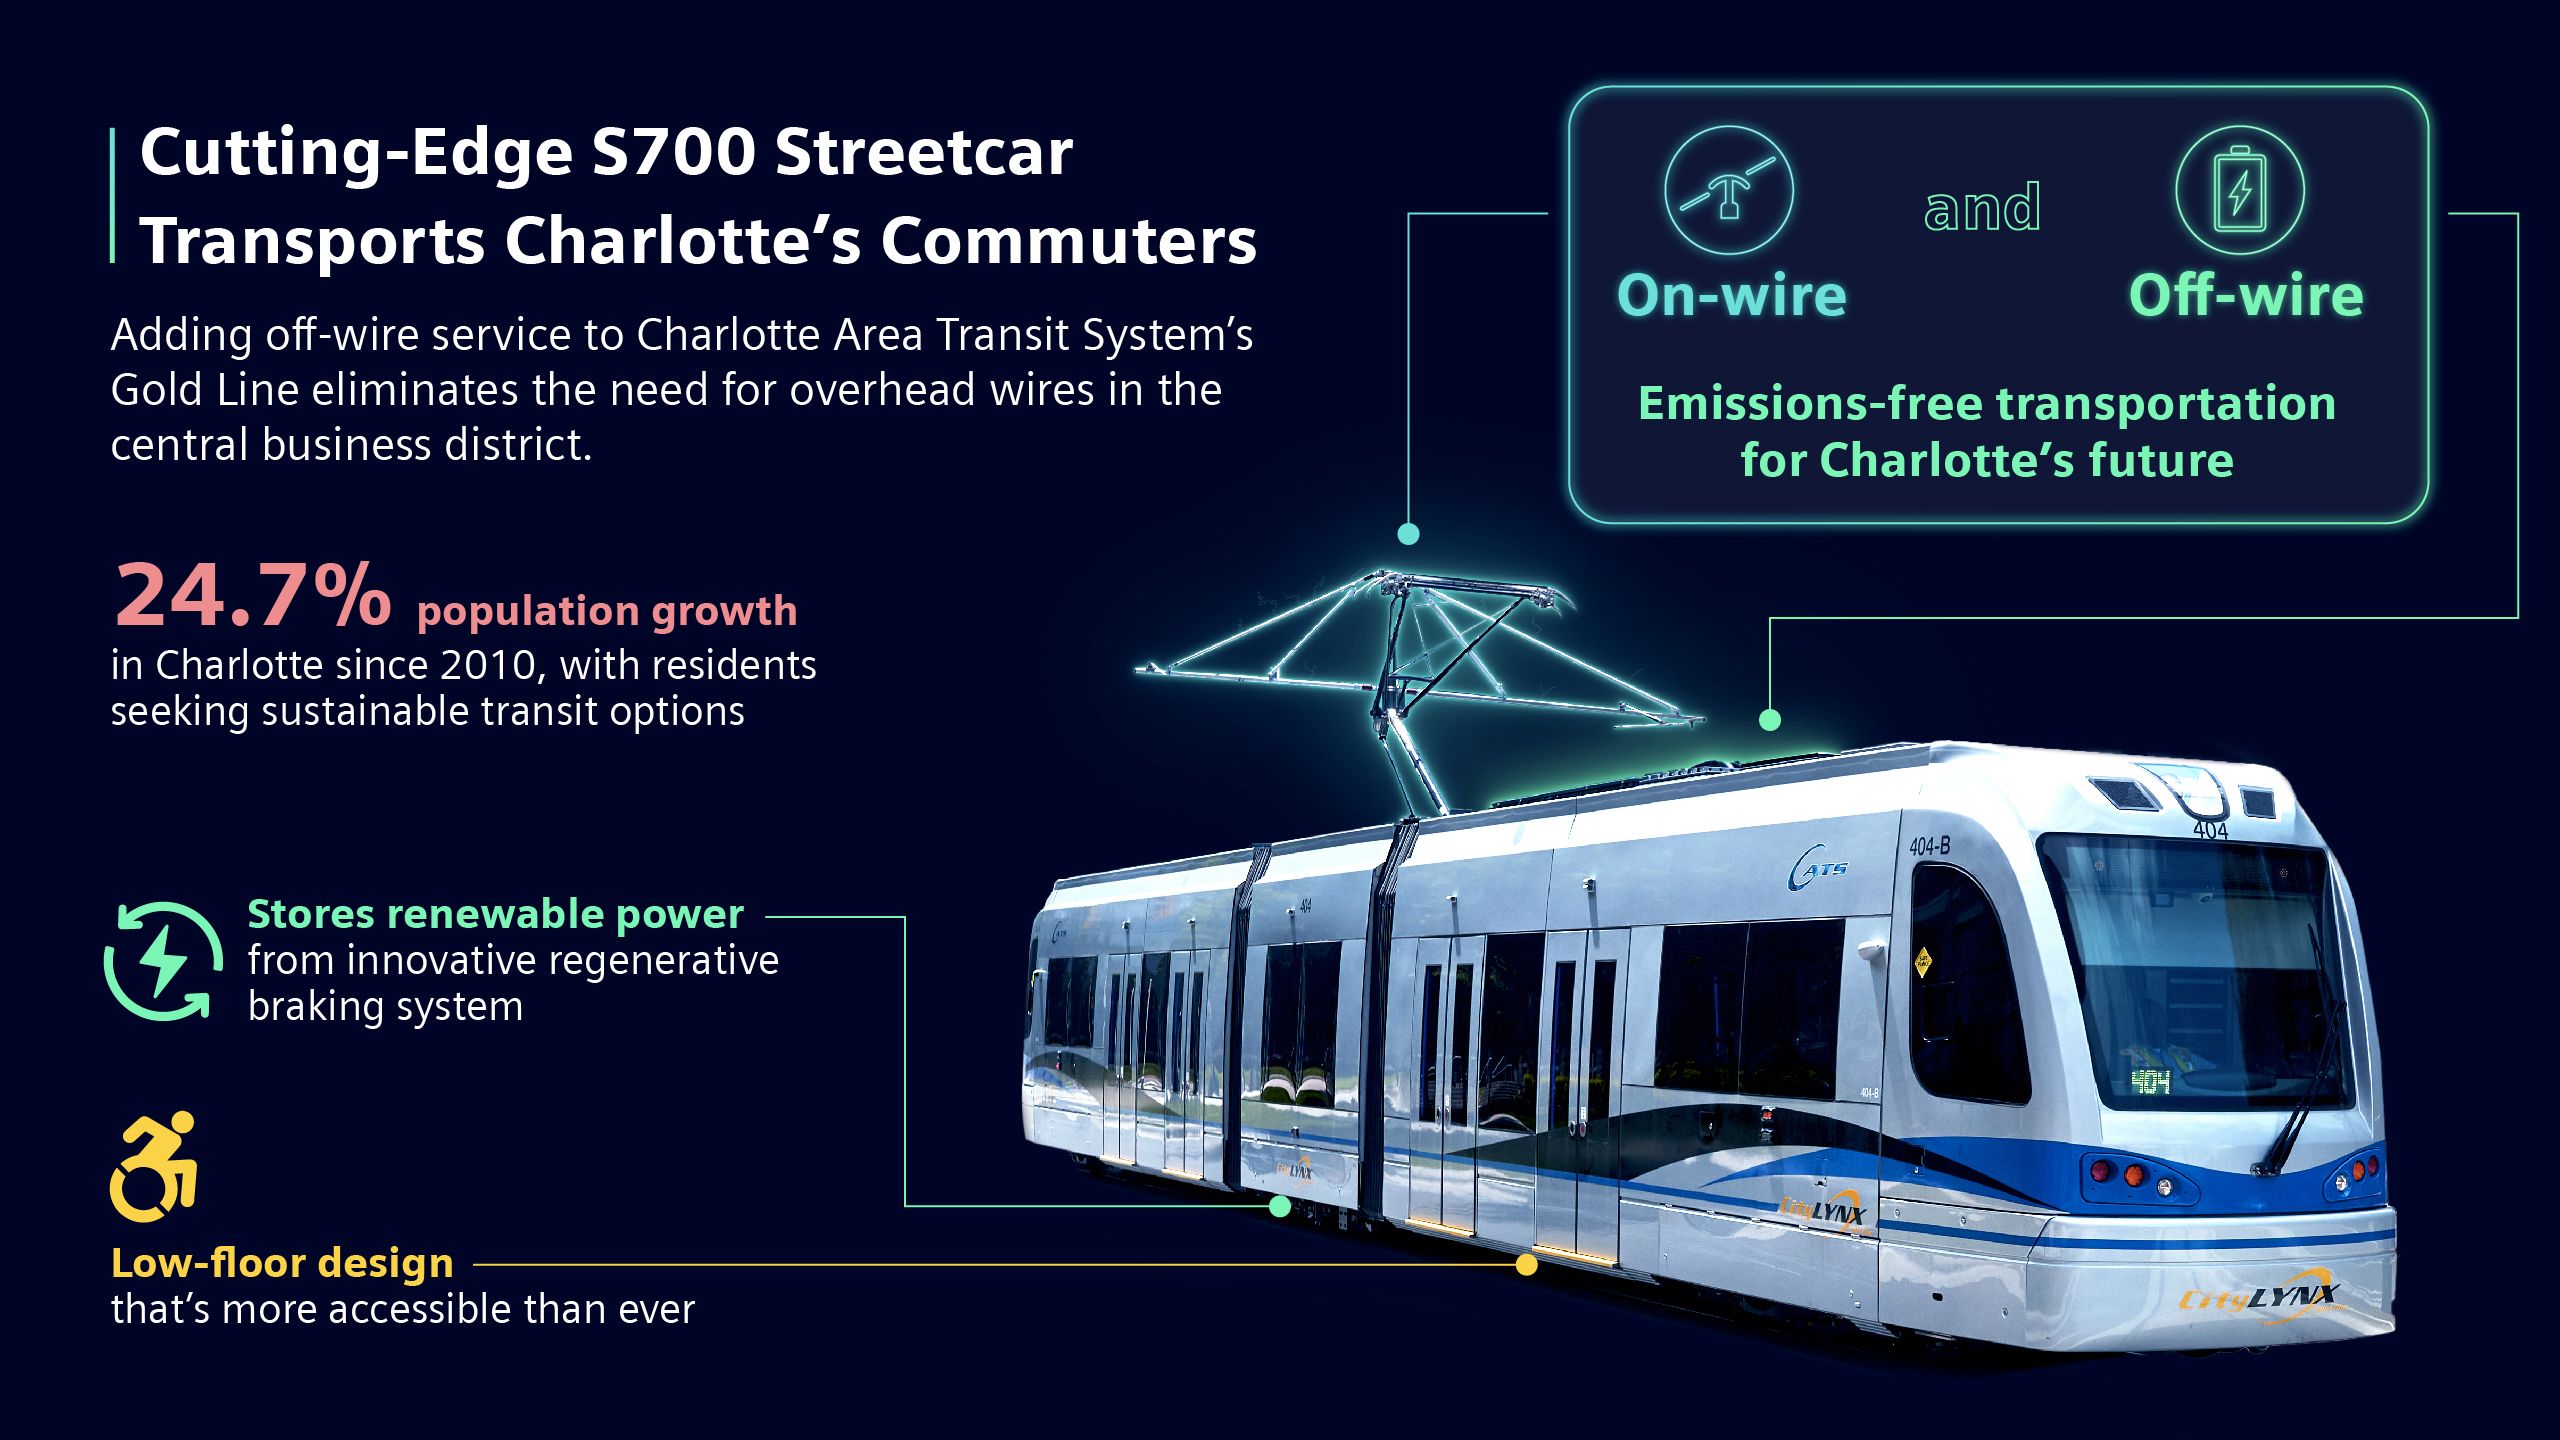 Cutting-edge hybrid S700 streetcar is game-changer for Charlotte Area Transit System